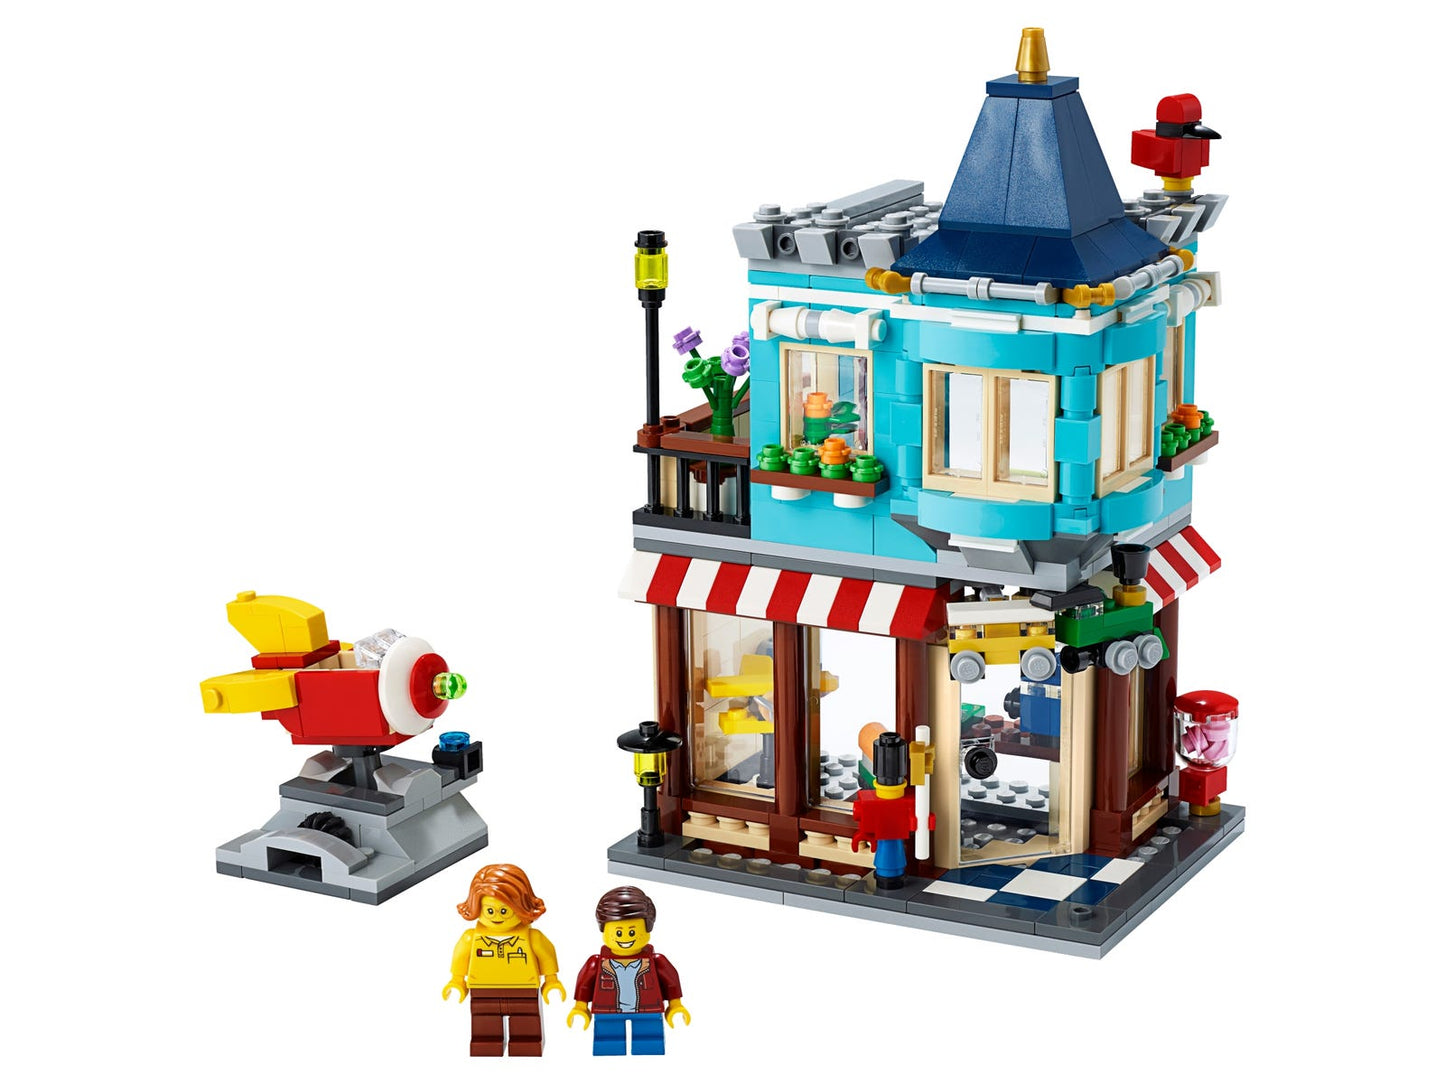 Lego Creator Townhouse Toy Store 31105